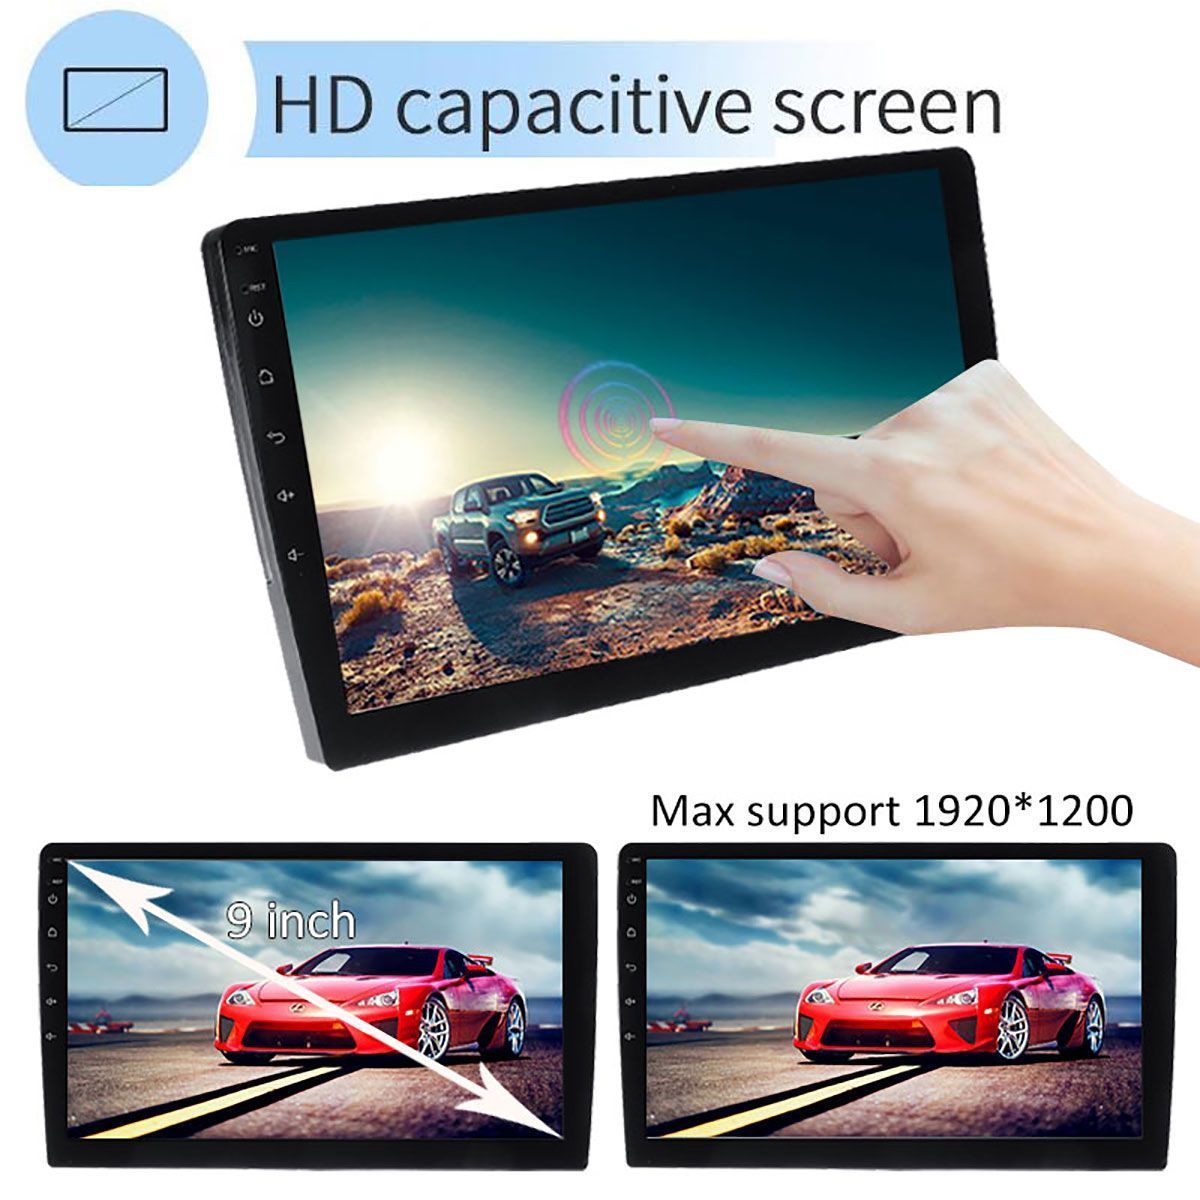 T3-9-Inch-for-Android-81-Car-MP5-Player-Quad-Core-116G-Stereo-Radio-GPS-bluetooth-WiFi-Rear-Carema-1498000